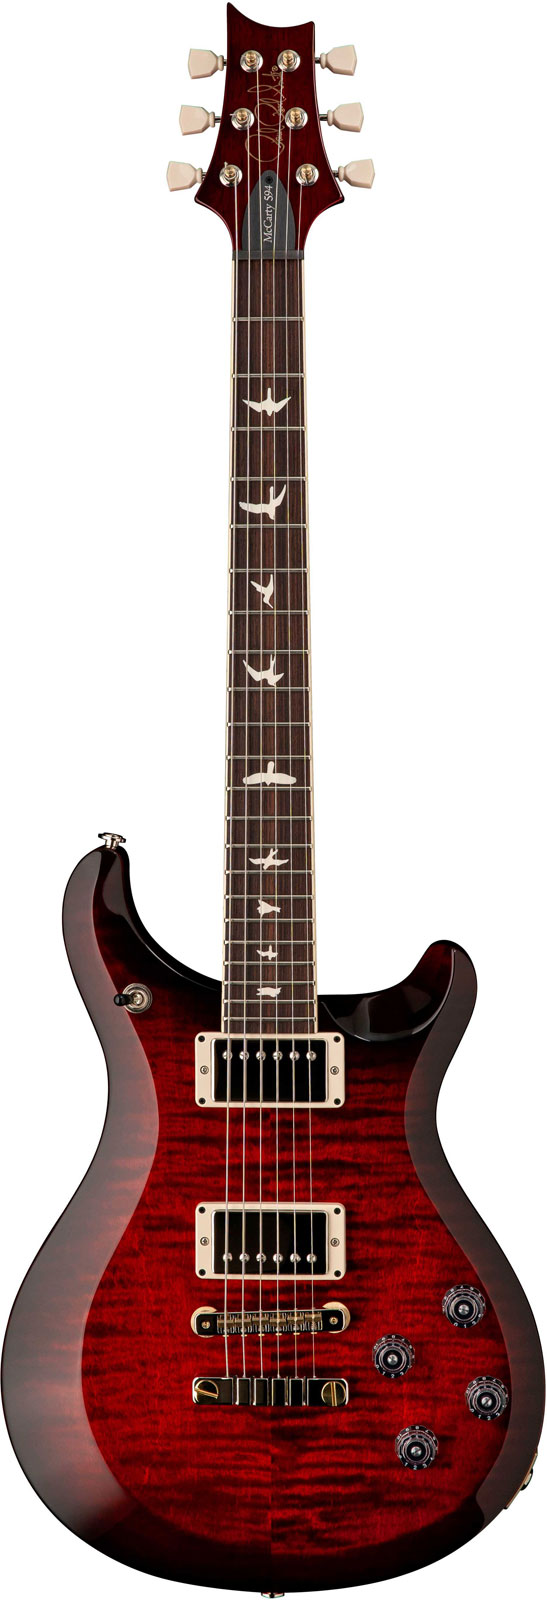 PRS - PAUL REED SMITH S2 MCCARTY 594 FIRE RED BURST - SECONDHAND